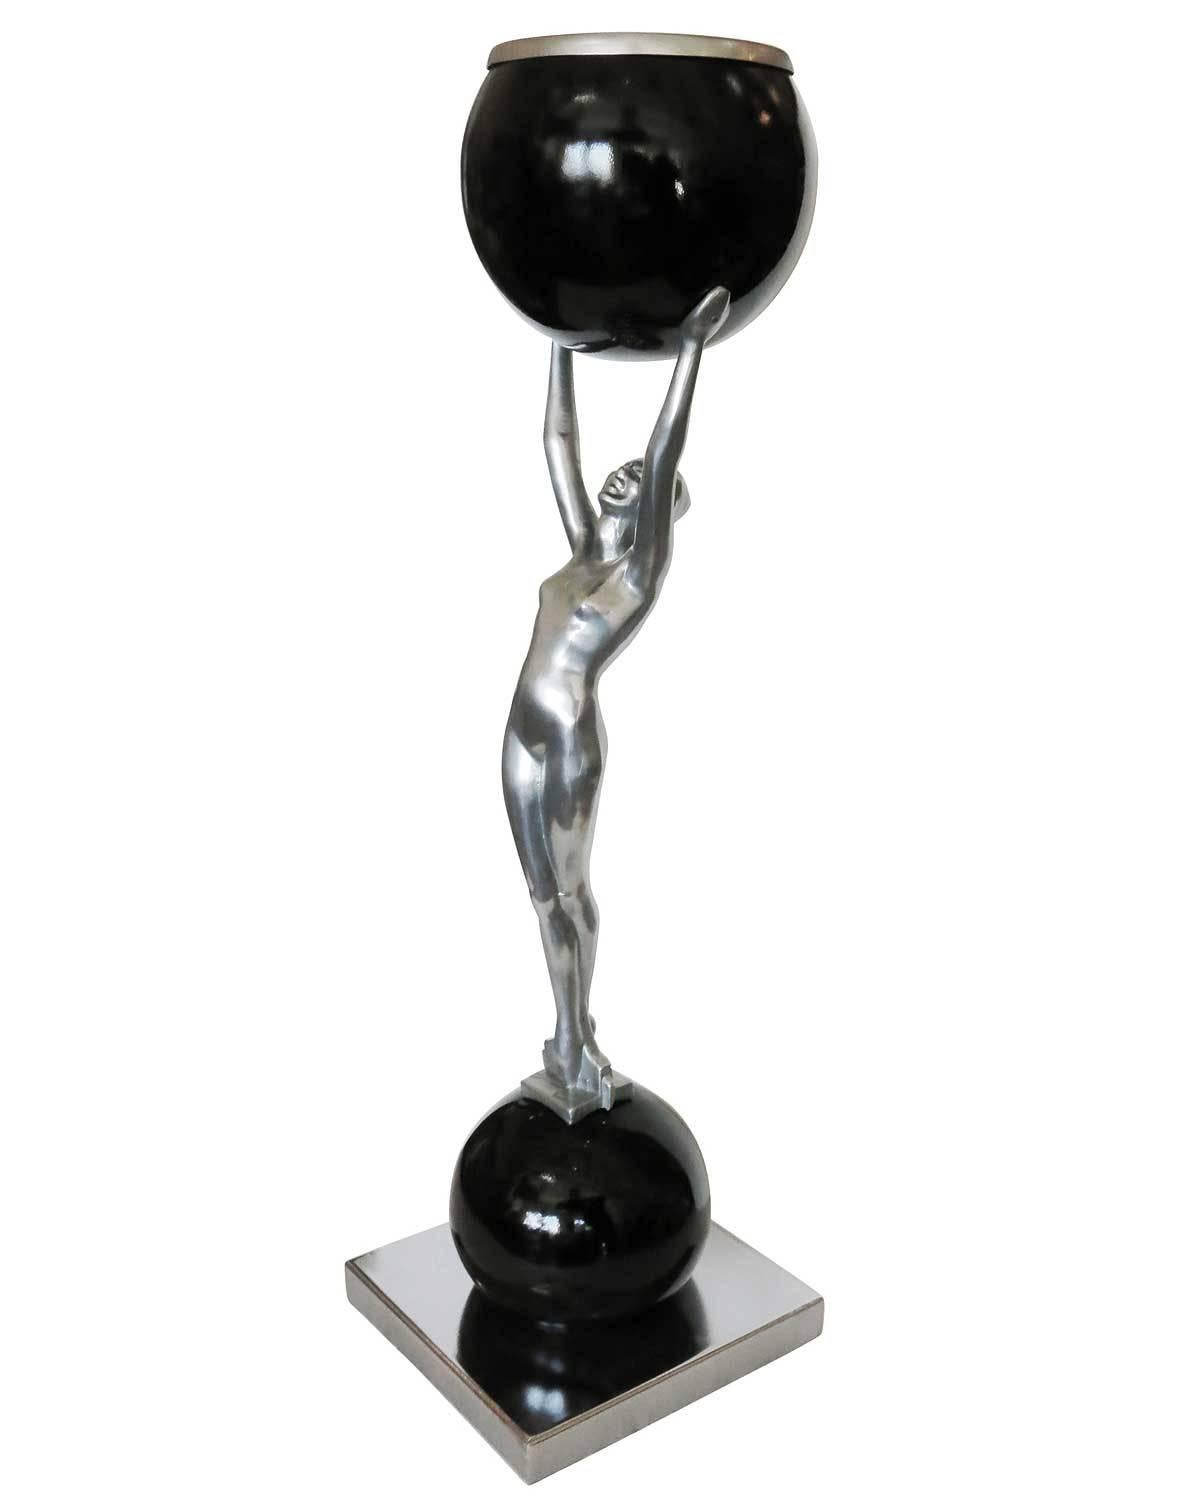 Frankart style cocktail smoker featuring a nude female figure standing on top of a chrome ball holding a black onyx ball with a a removable ashtray along the top. 

Available - 2.